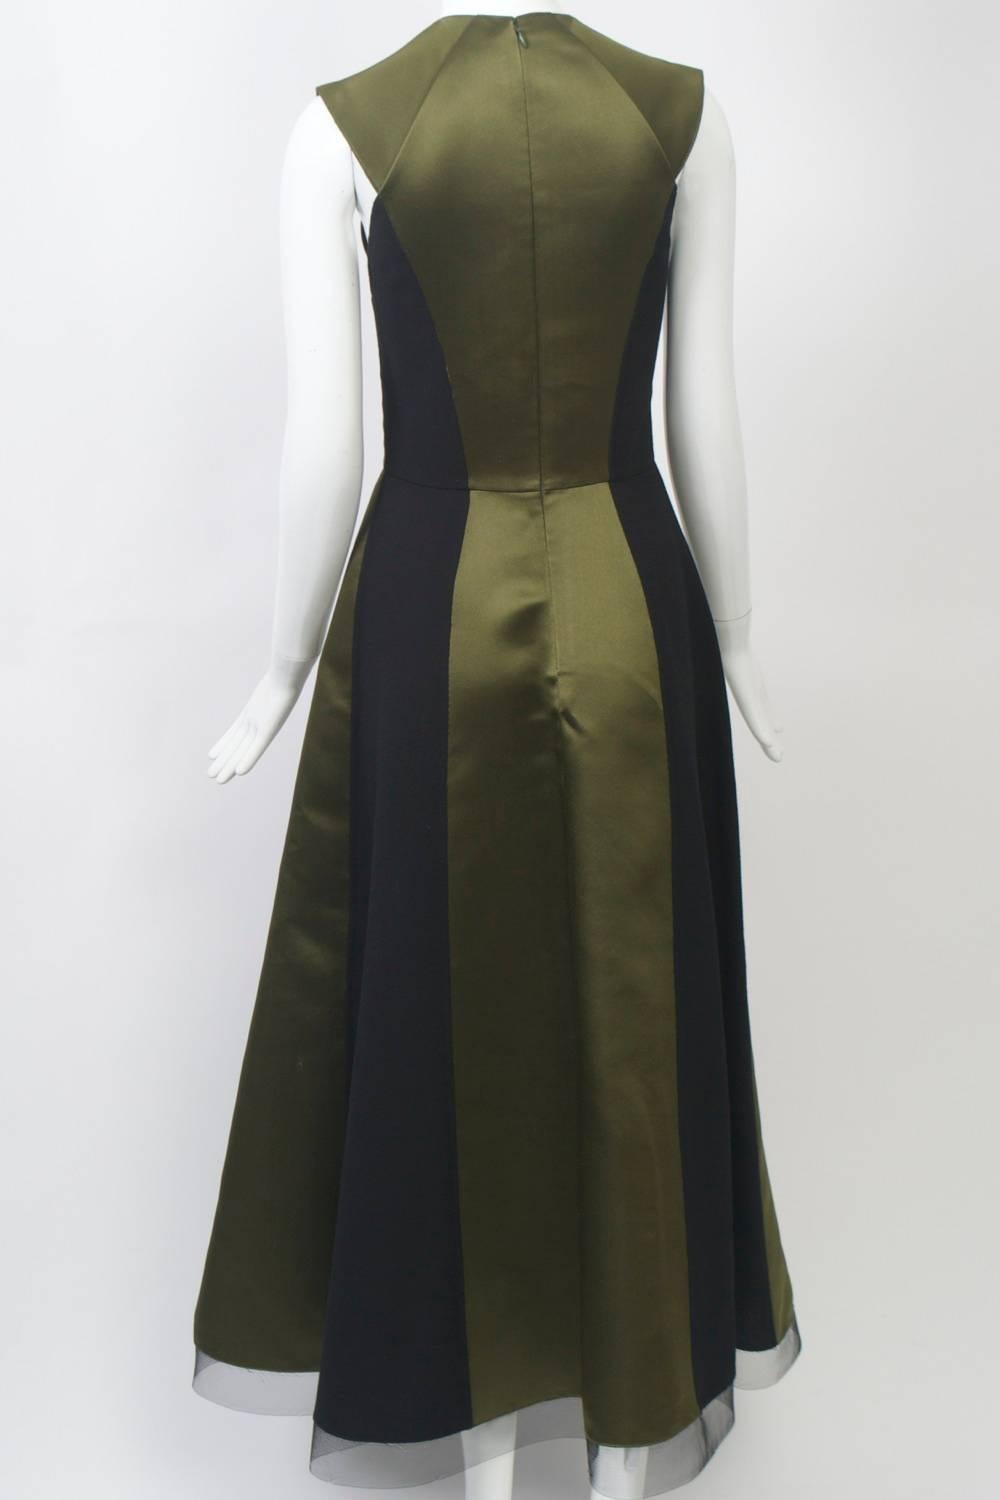 Women's Geoffrey Beene Olive/Black Gown with Stole For Sale